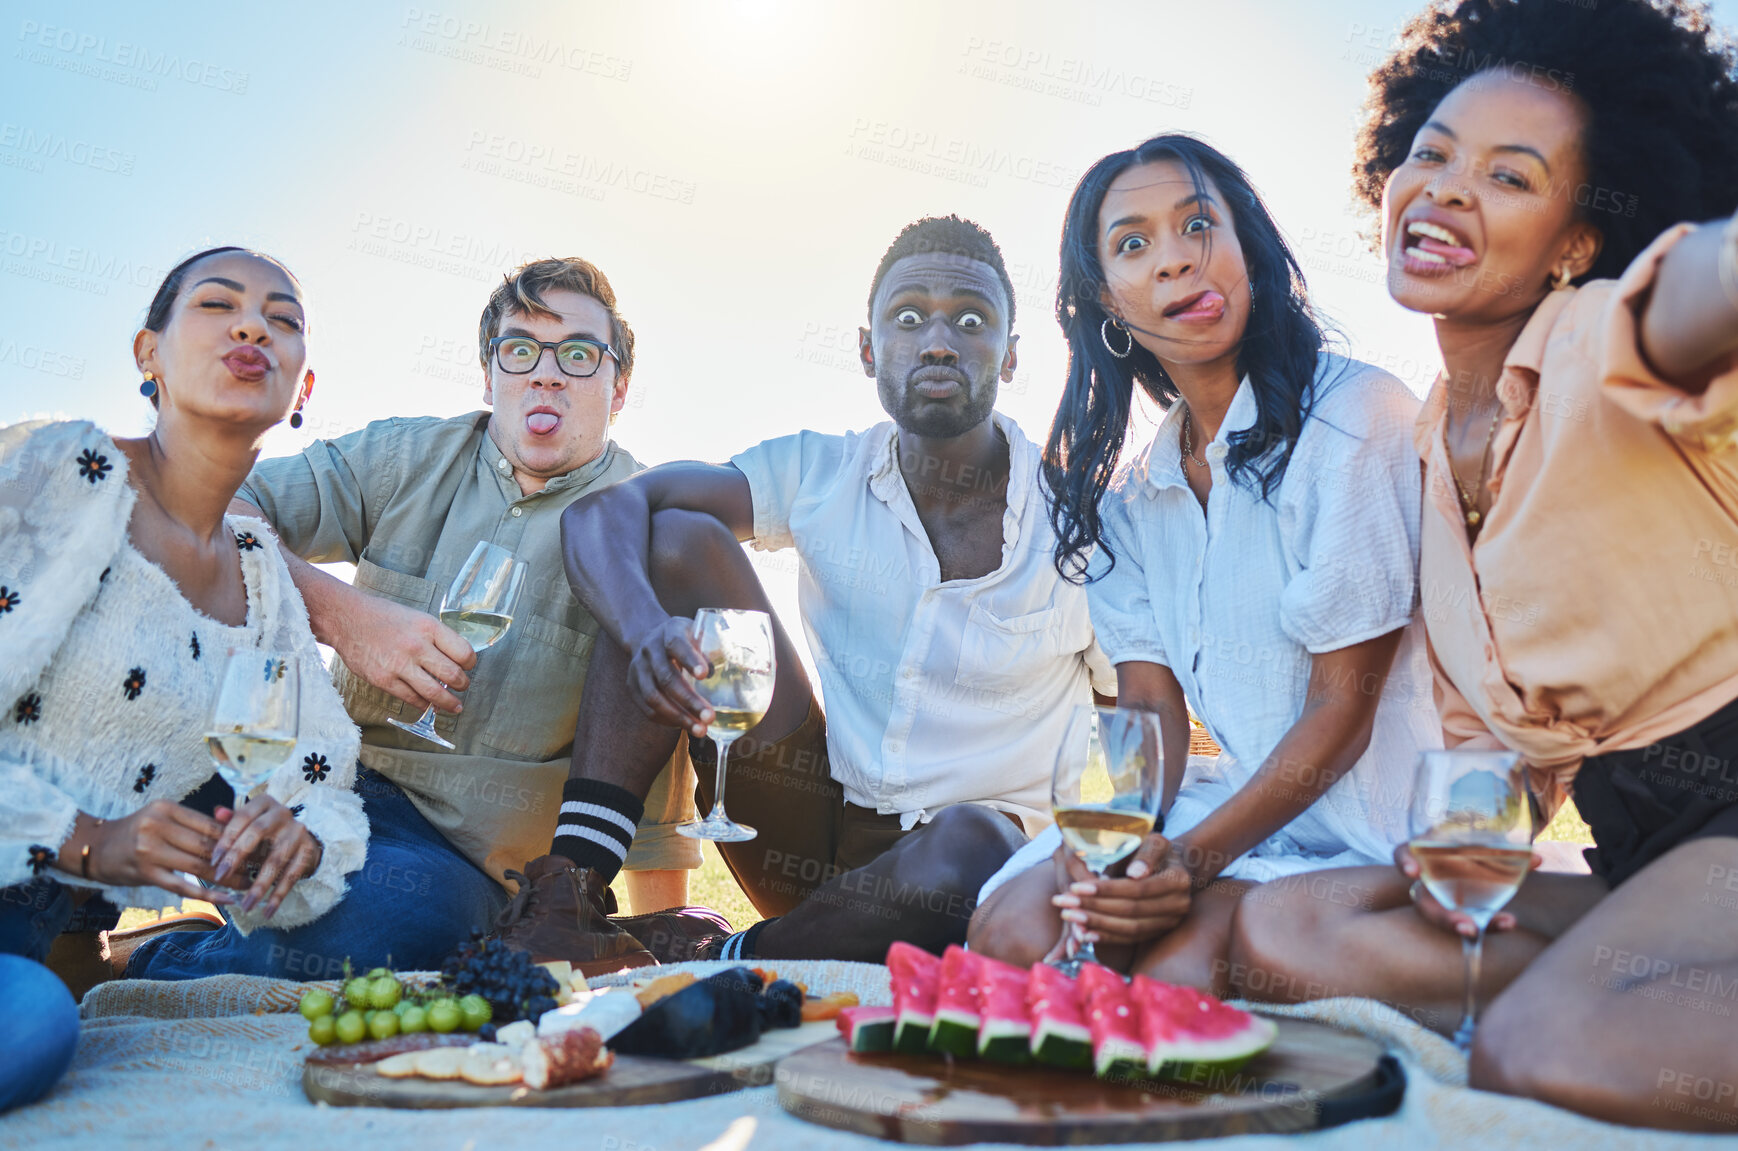 Buy stock photo Watermelon, selfie or crazy friends on picnic to enjoy bonding or eating healthy fruits in summer. Grapes, funny faces or happy people drinking wine with food on a relaxing holiday vacation in nature